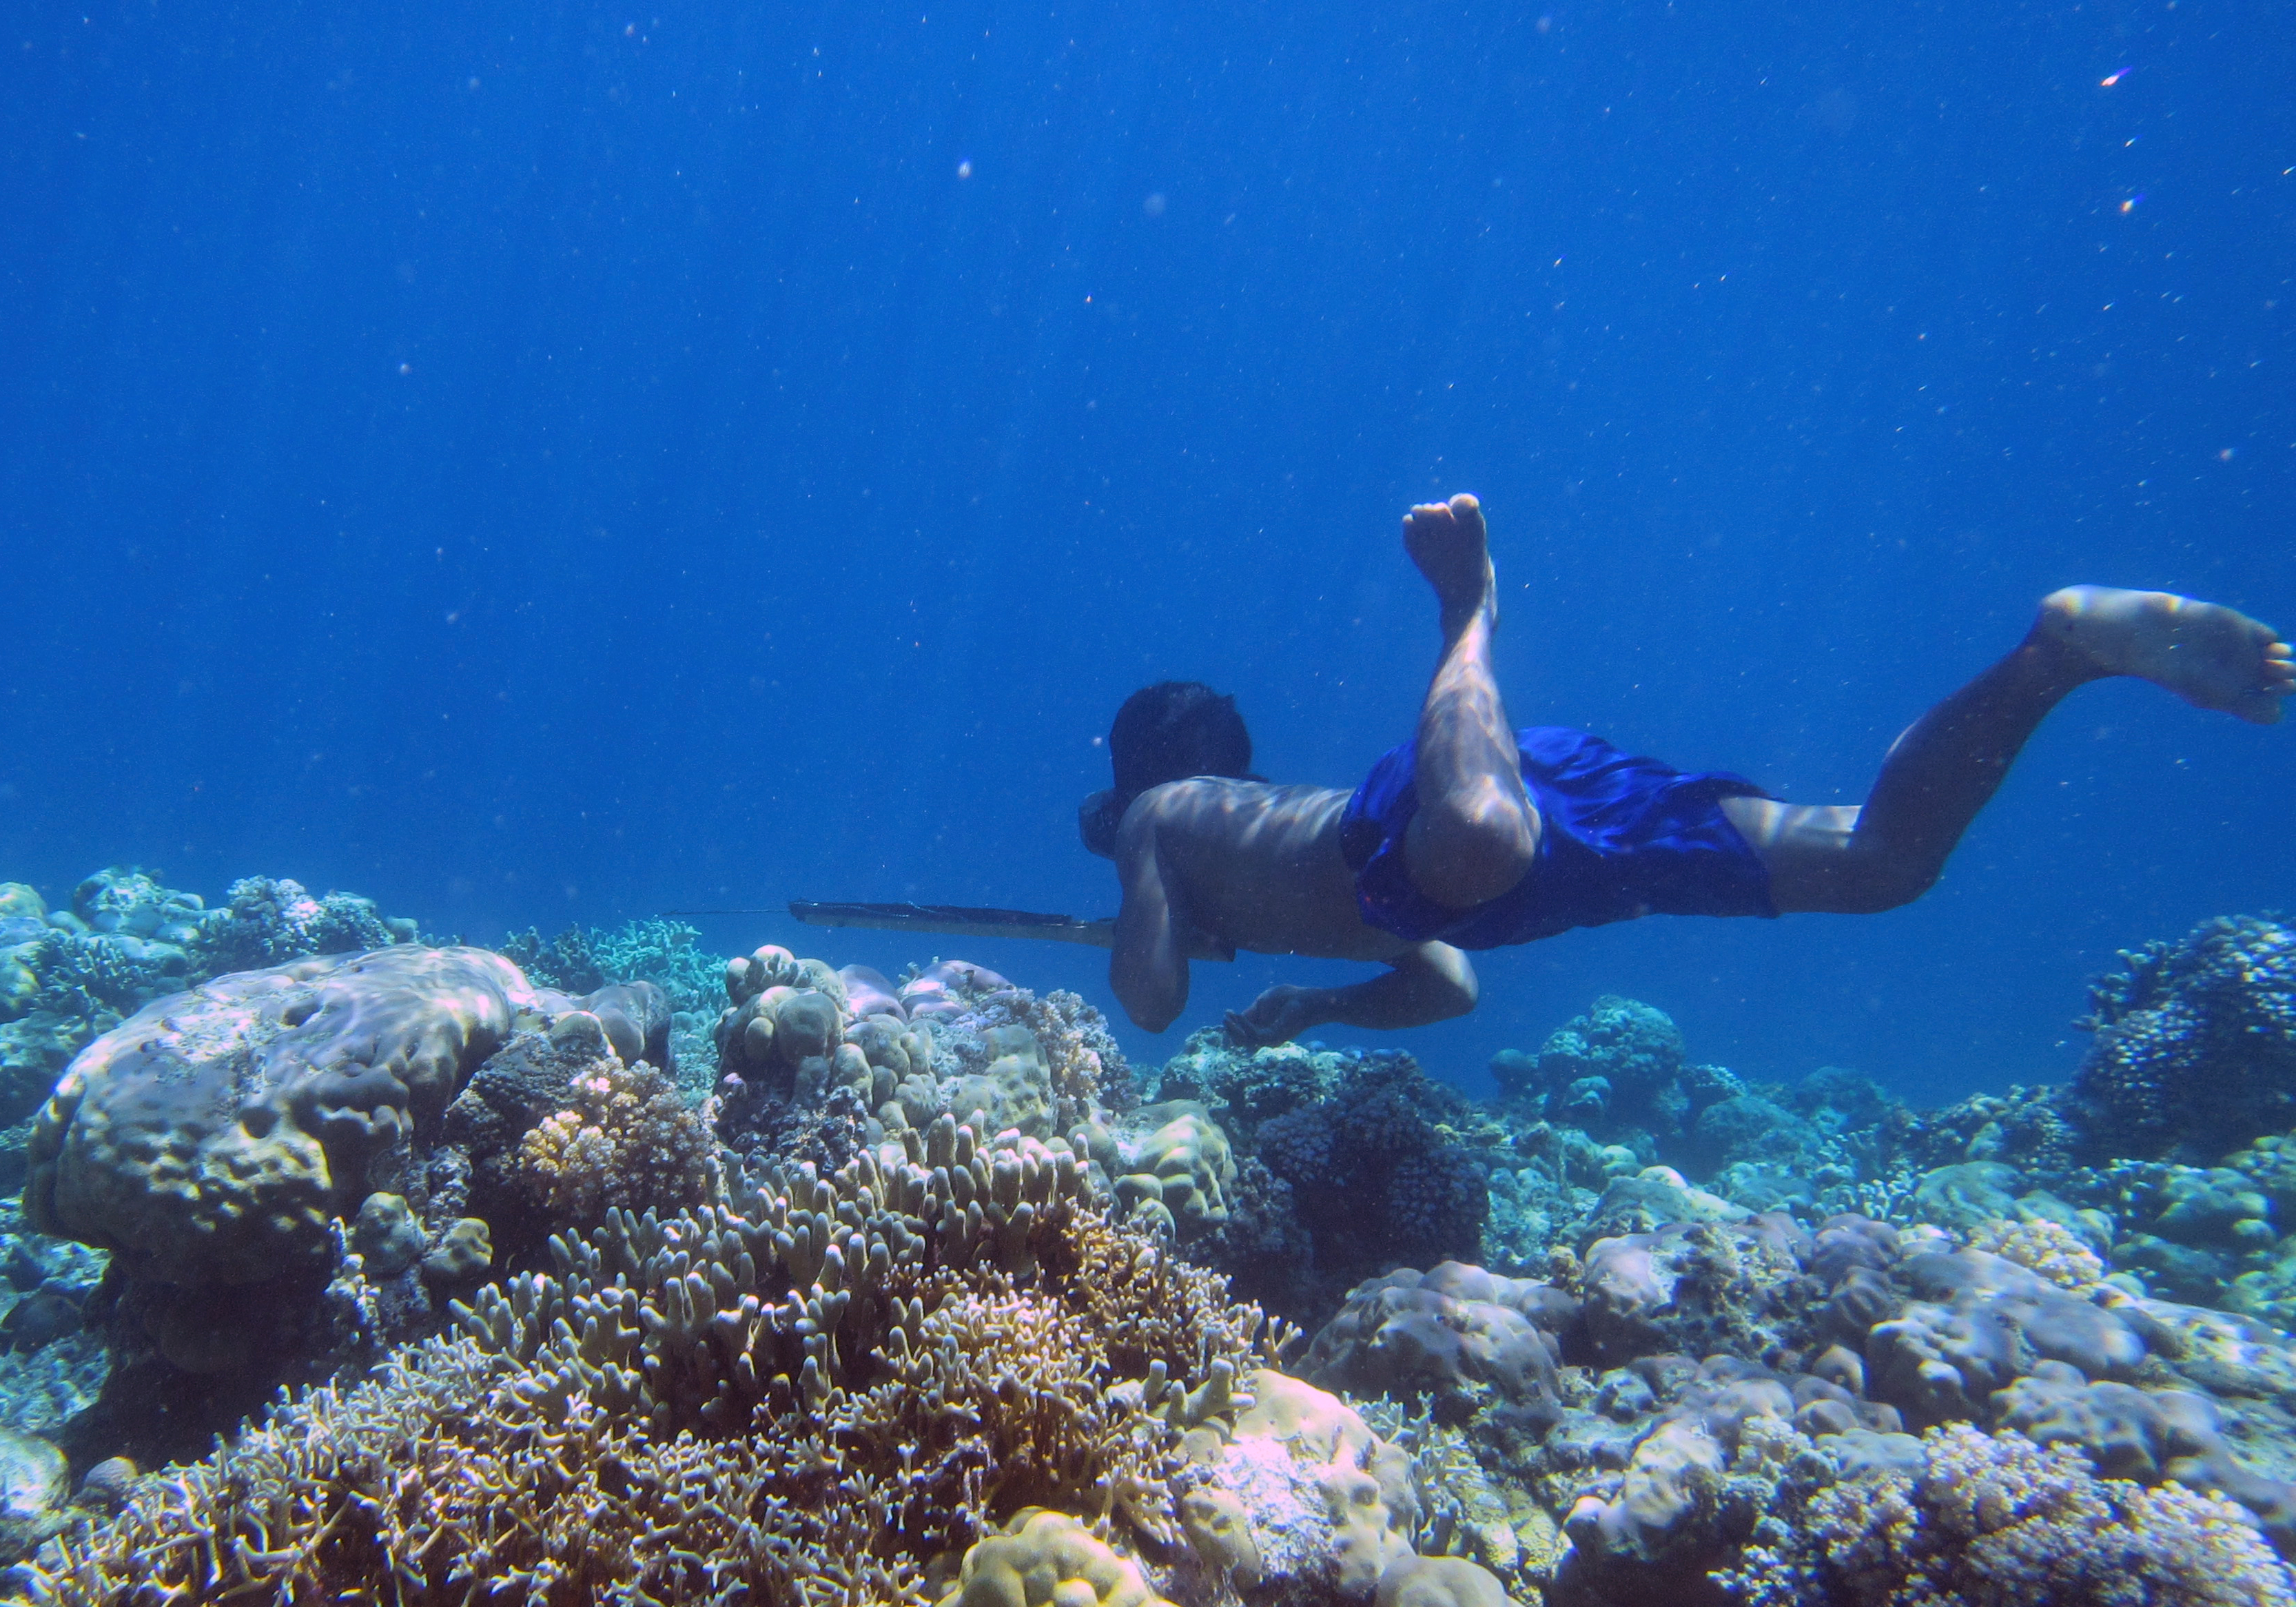 A Bajau diver hunts with a spear